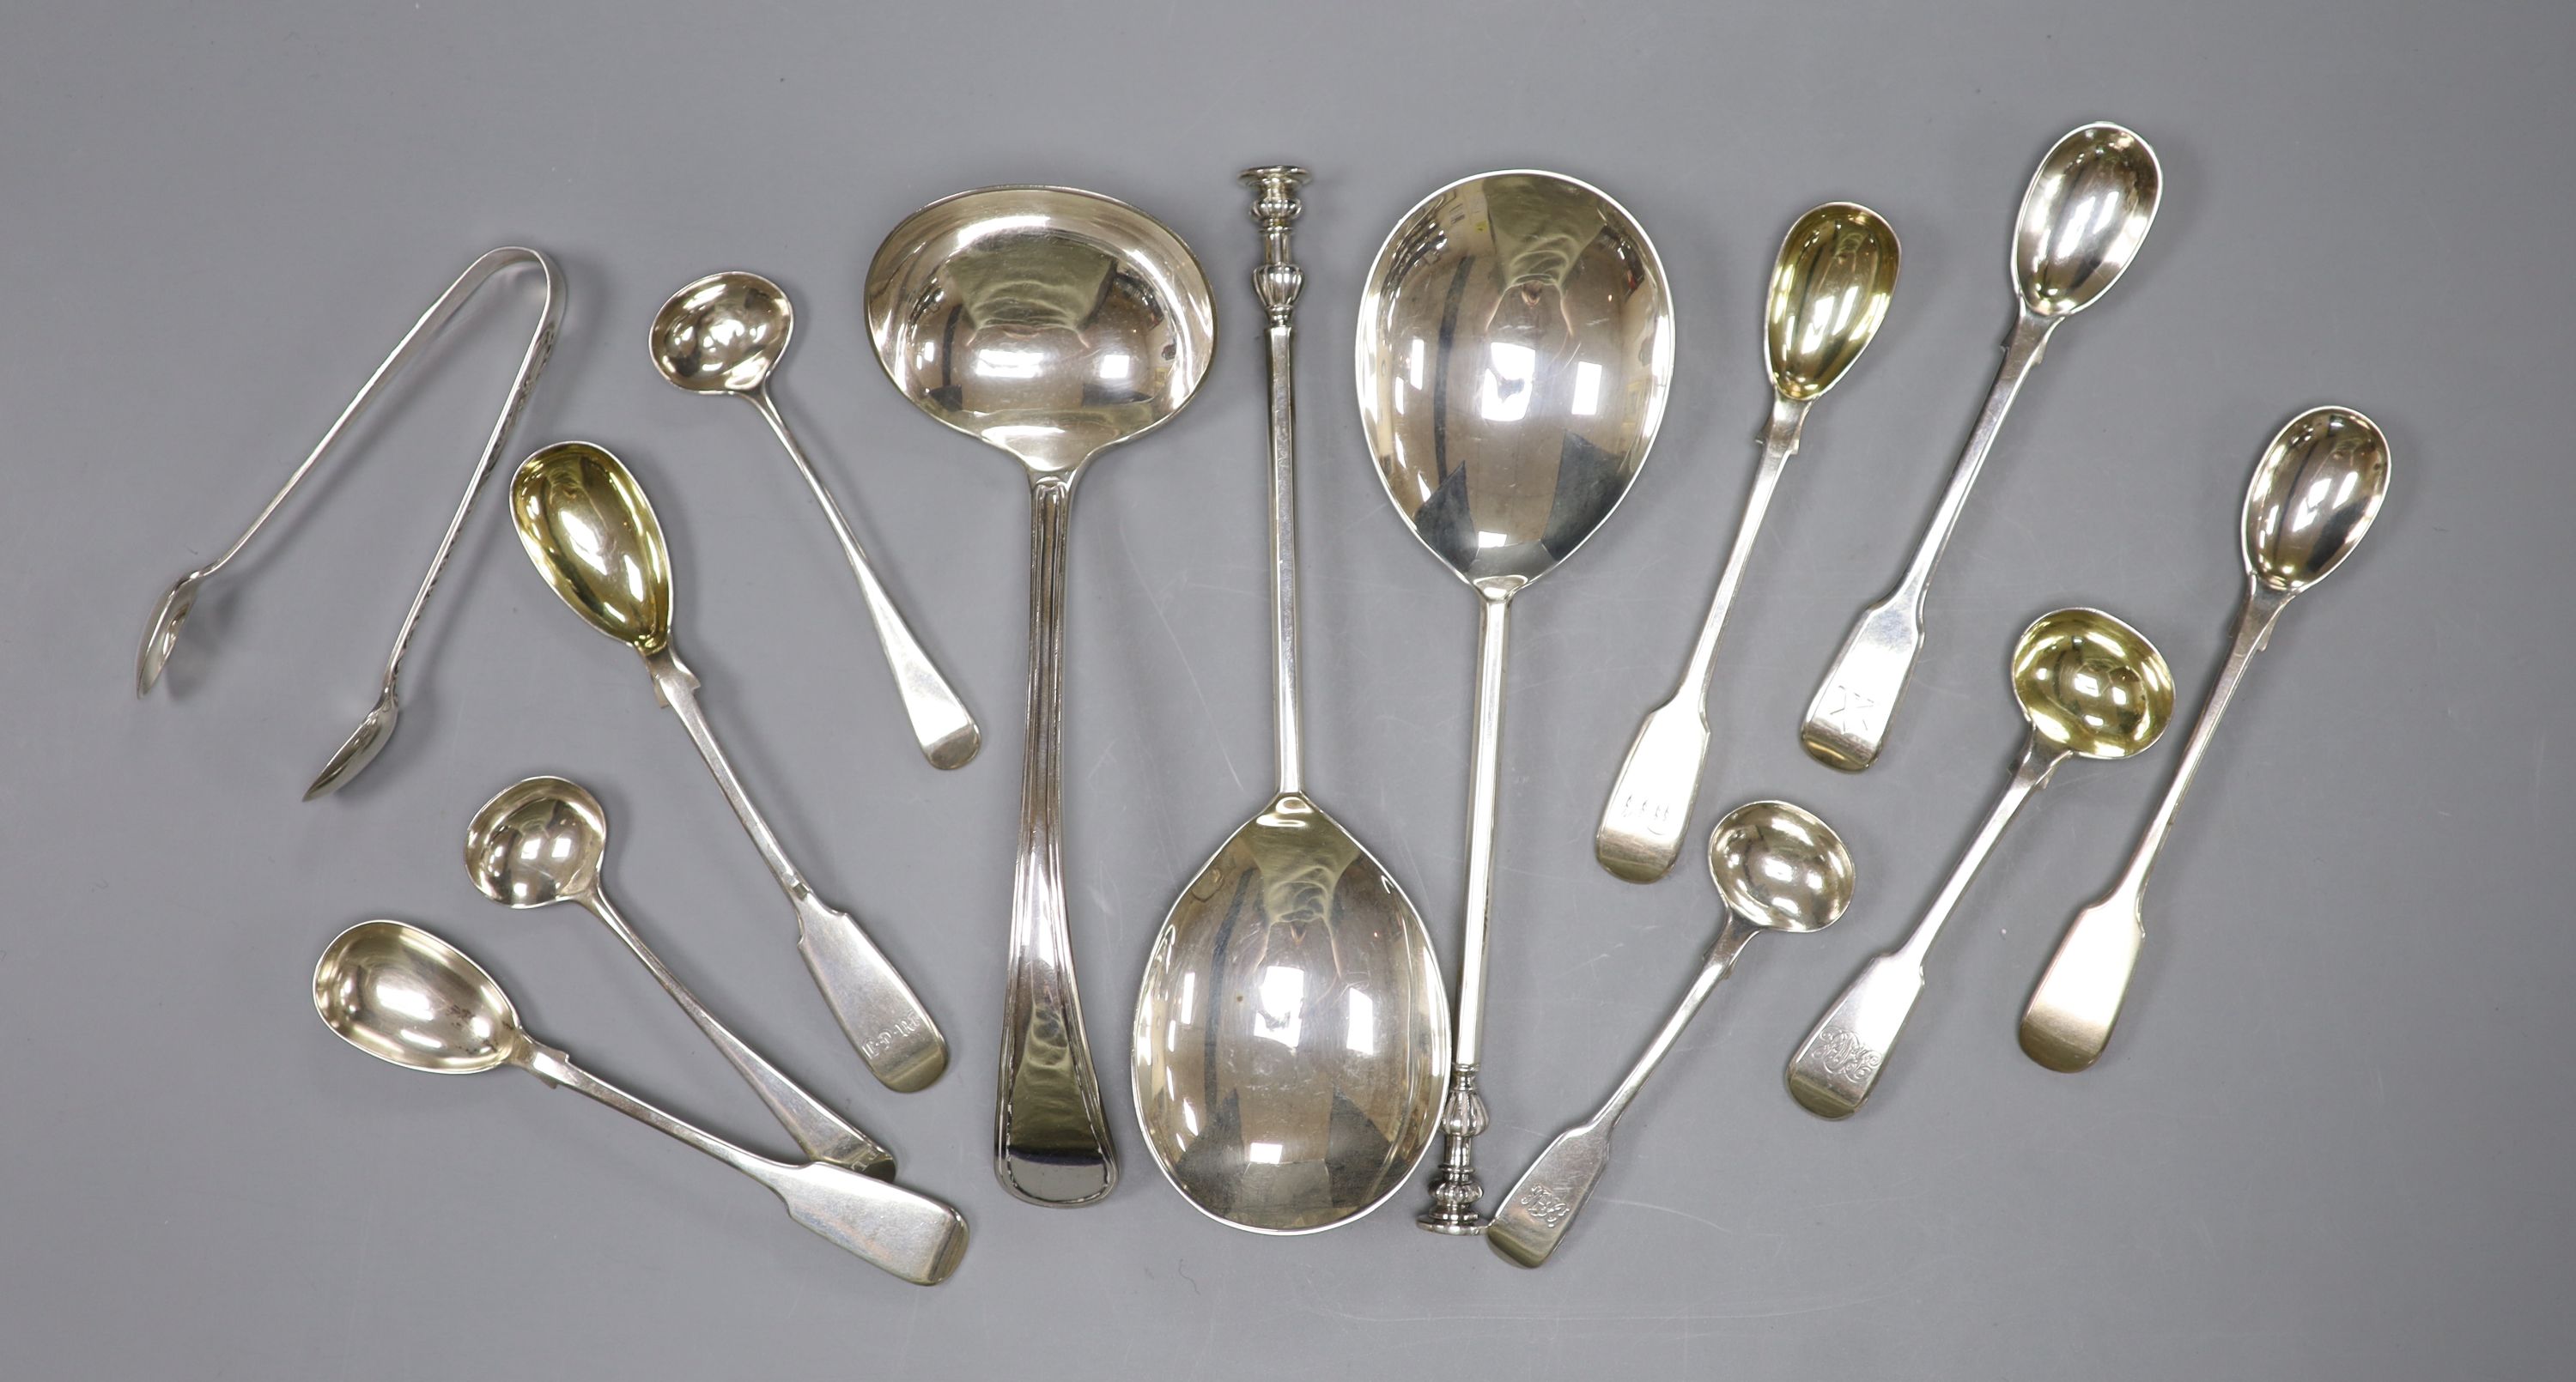 A pair of Mappin & Webb silver seal top spoons, five silver mustard spoons, four salts spoons, a pair of sugar tongs (Georgian and later) and a plated sauce ladle